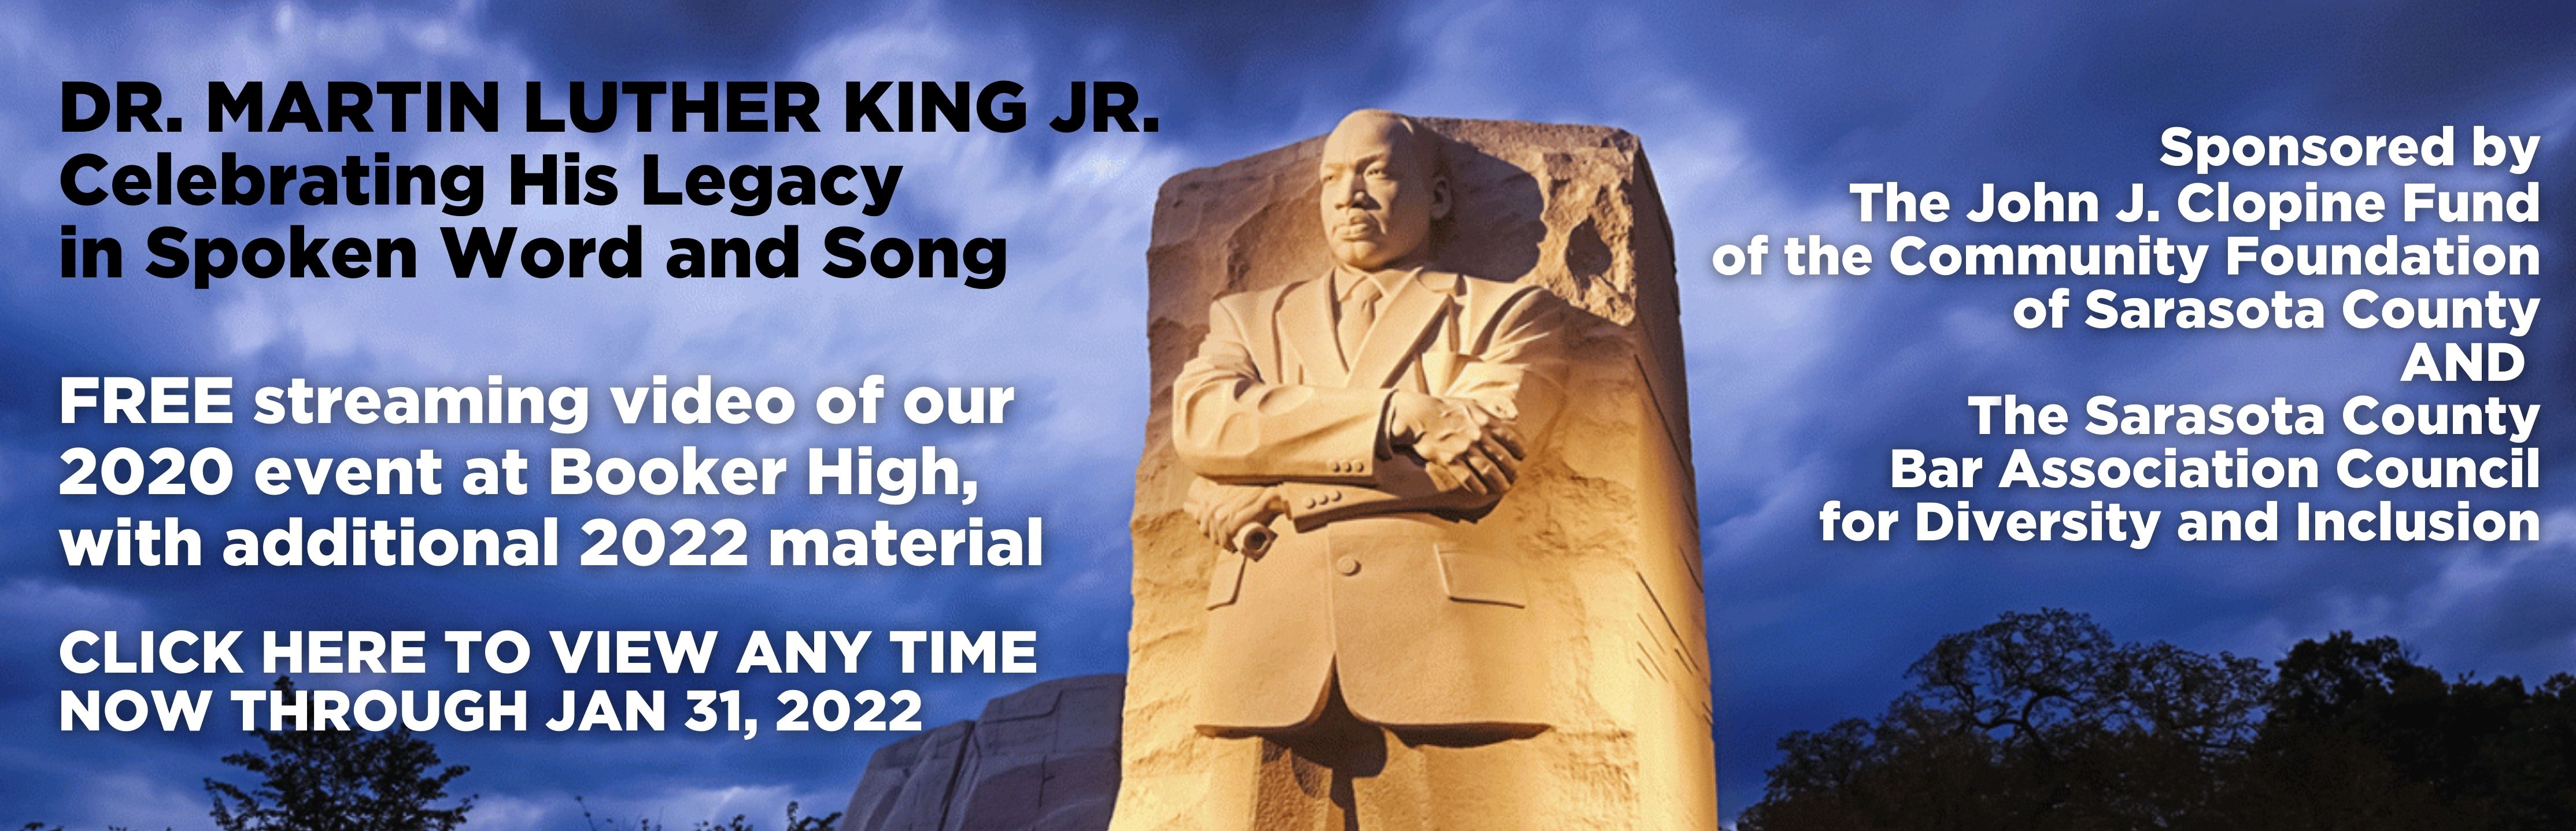 Dr. Martin Luther King Jr.; Celebrating His Legacy in Spoken Word and Song; Free Streaming Video of Our 2020 at Booker High, with Additional 2022 Material; Click Here to View Any Time Through Jan 31, 2022